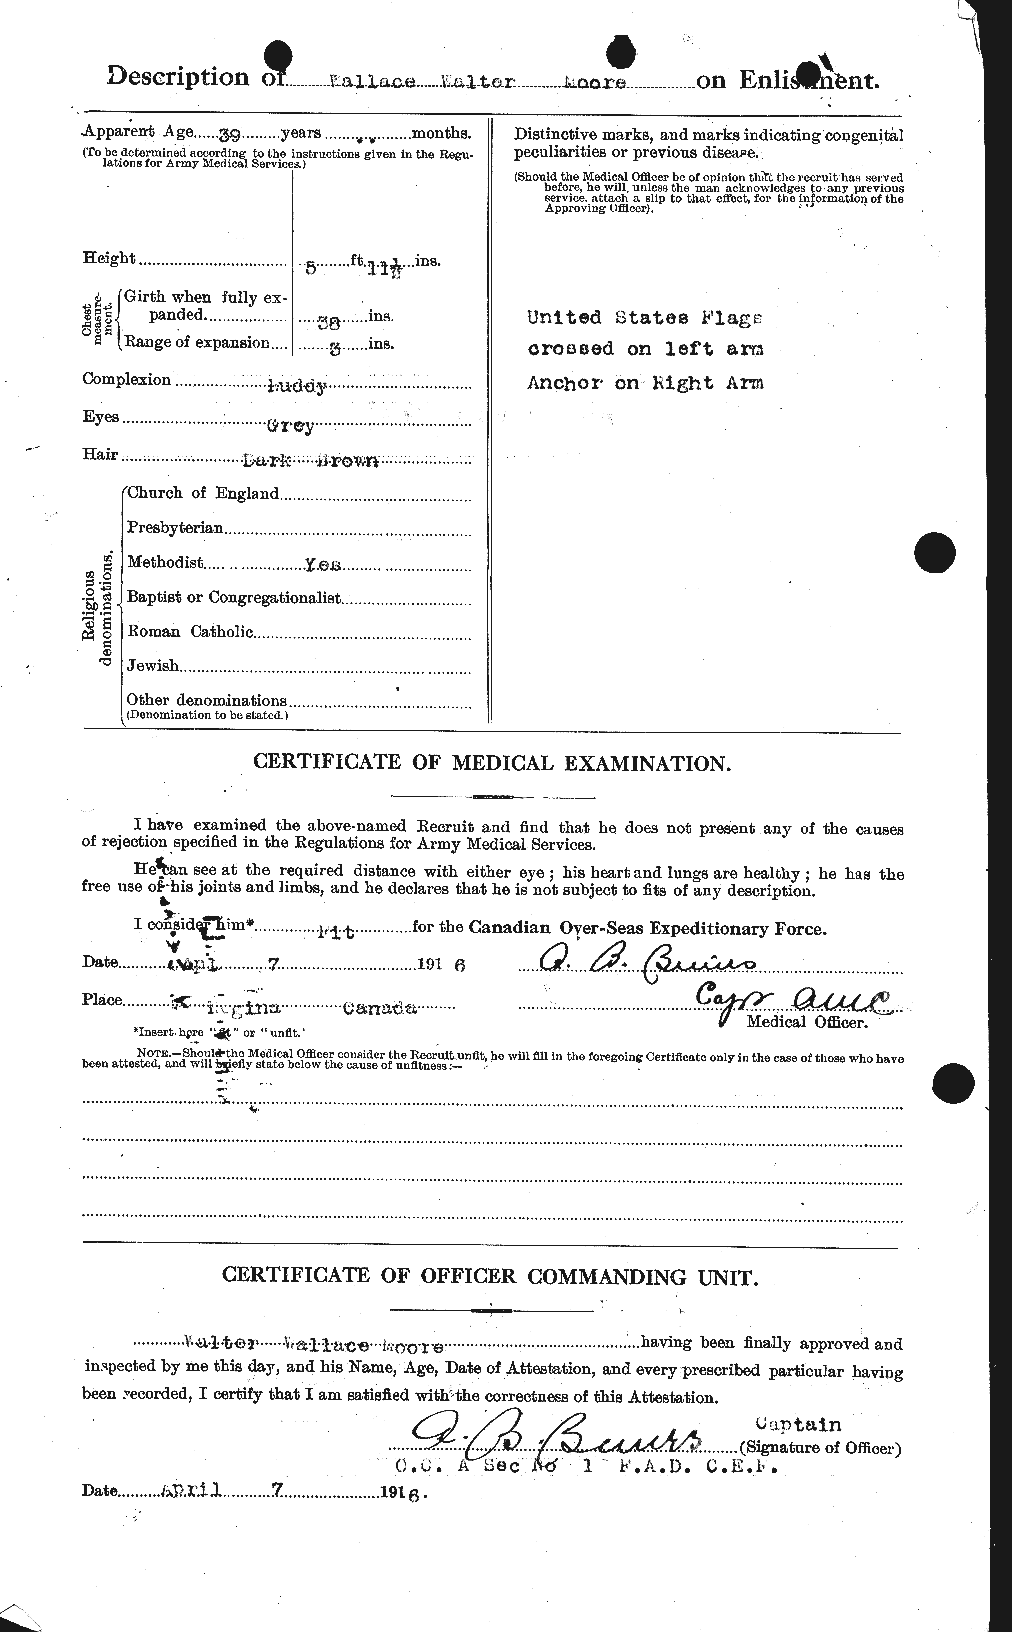 Personnel Records of the First World War - CEF 505688b